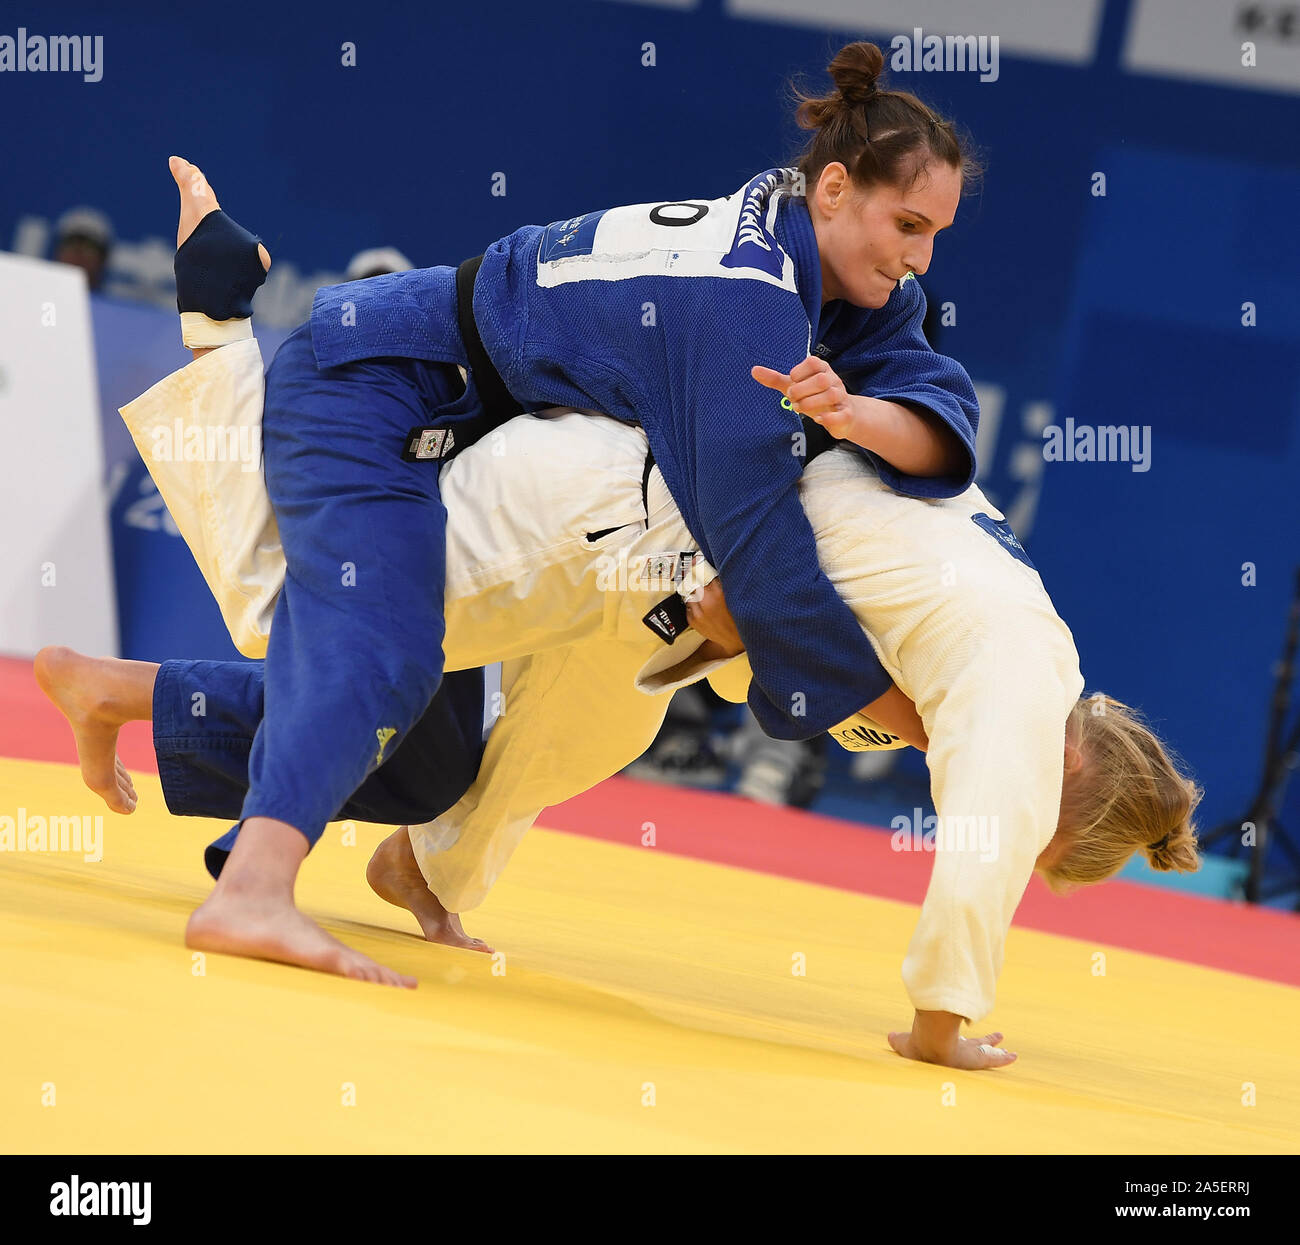 Wuhan, China's Hubei Province. 20th Oct, 2019. Klara Apotekar (top) of  Slovenia competes with Evelin Salanki of Hungary during the women's 78kg  judo final at the 7th International Military Sports Council (CISM)